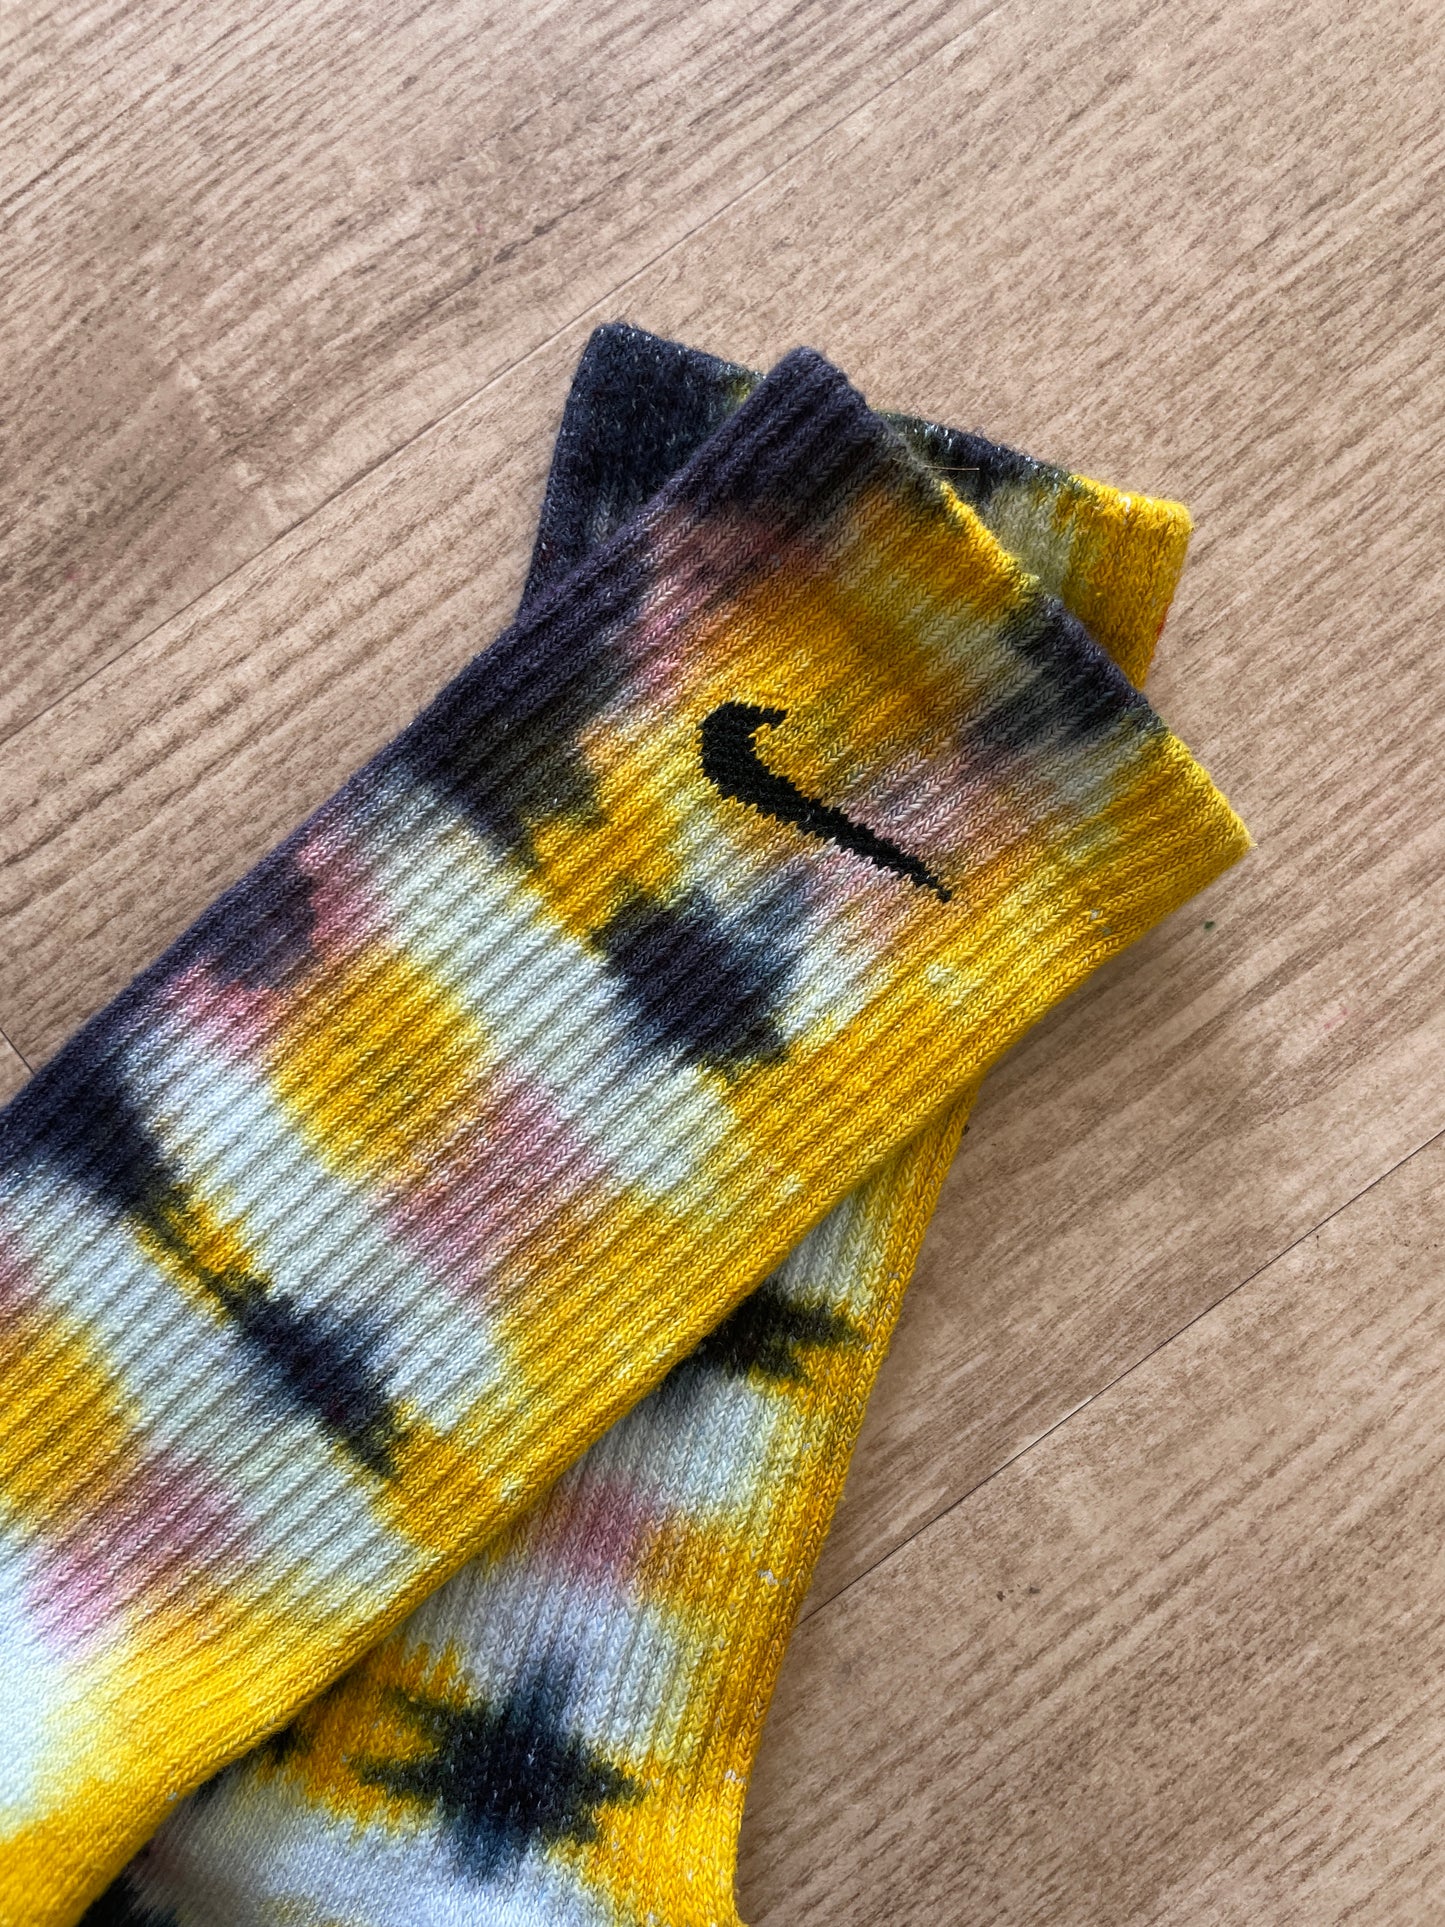 NIKE Socks Hand Tie Dyed Black, Yellow, and Pink Nike Dri-FIT Everyday Plus Crew Training Socks - Size Large (Men's 8-12/Women's 10-13)